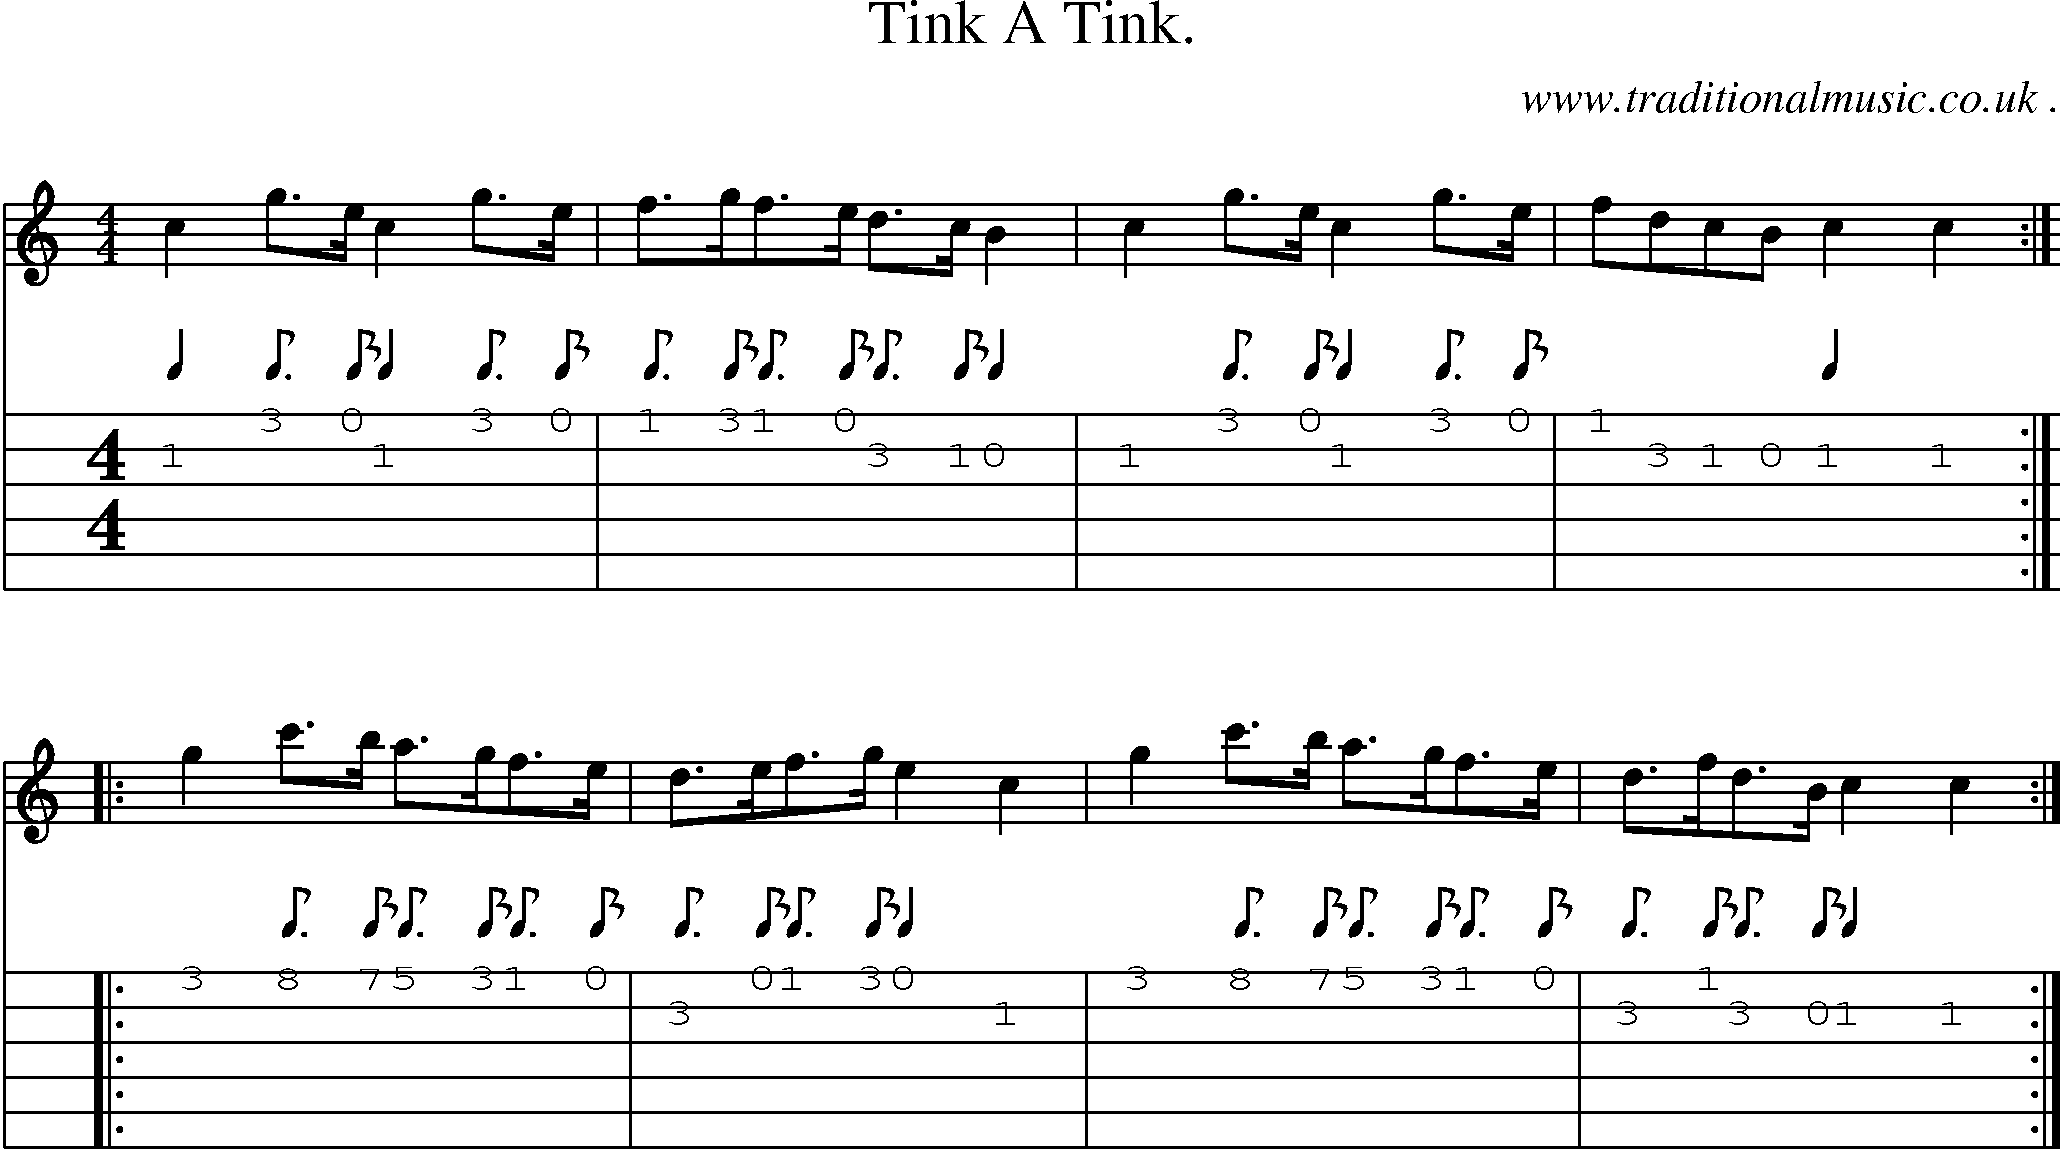 Sheet-Music and Guitar Tabs for Tink A Tink